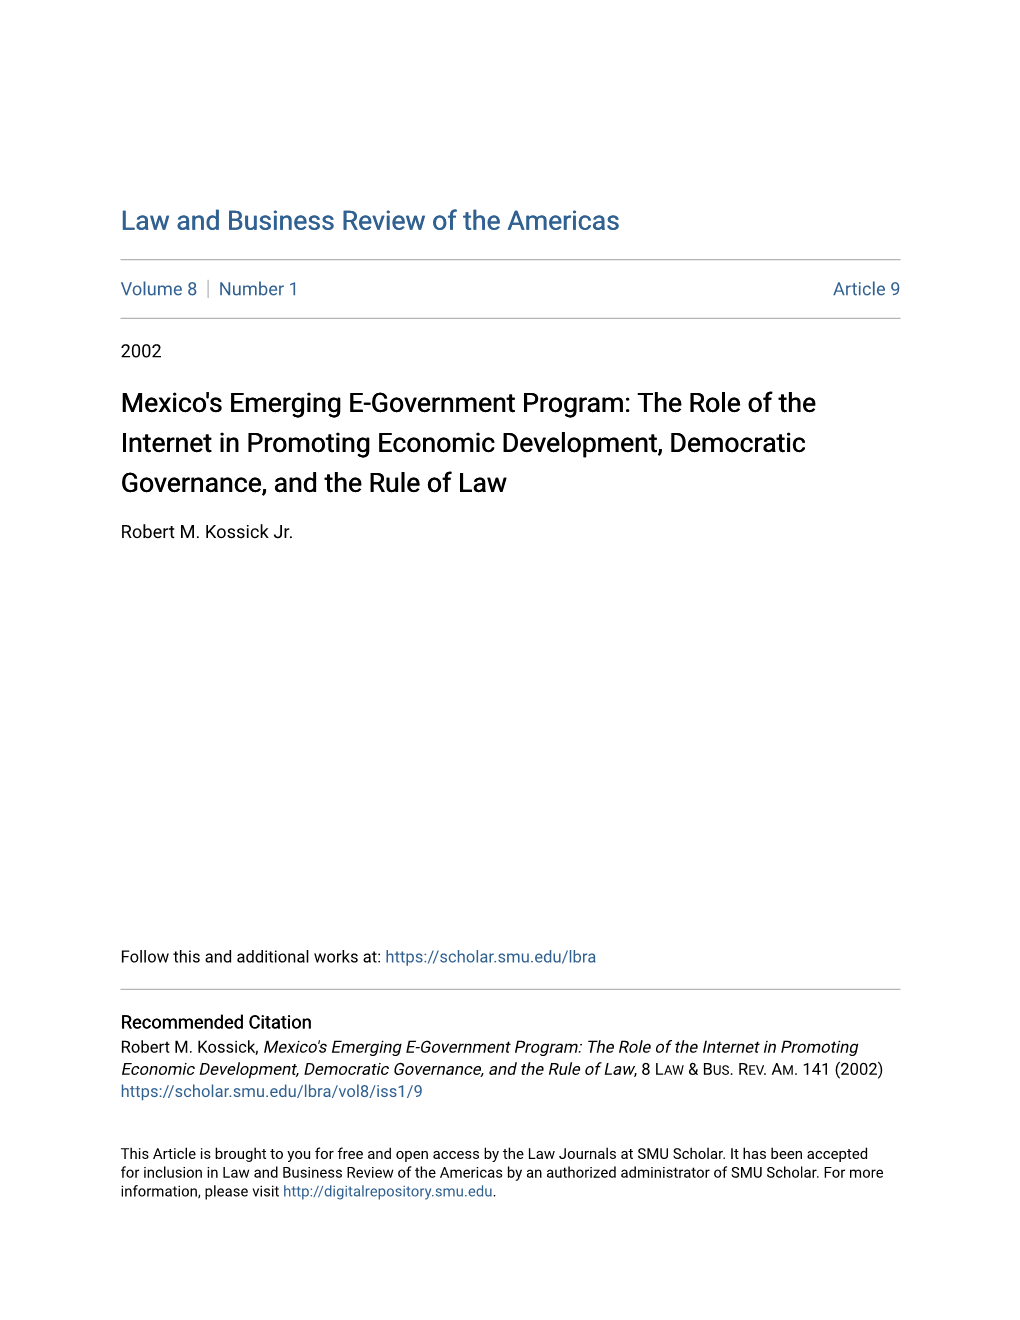 Mexico's Emerging E-Government Program: the Role of the Internet in Promoting Economic Development, Democratic Governance, and the Rule of Law